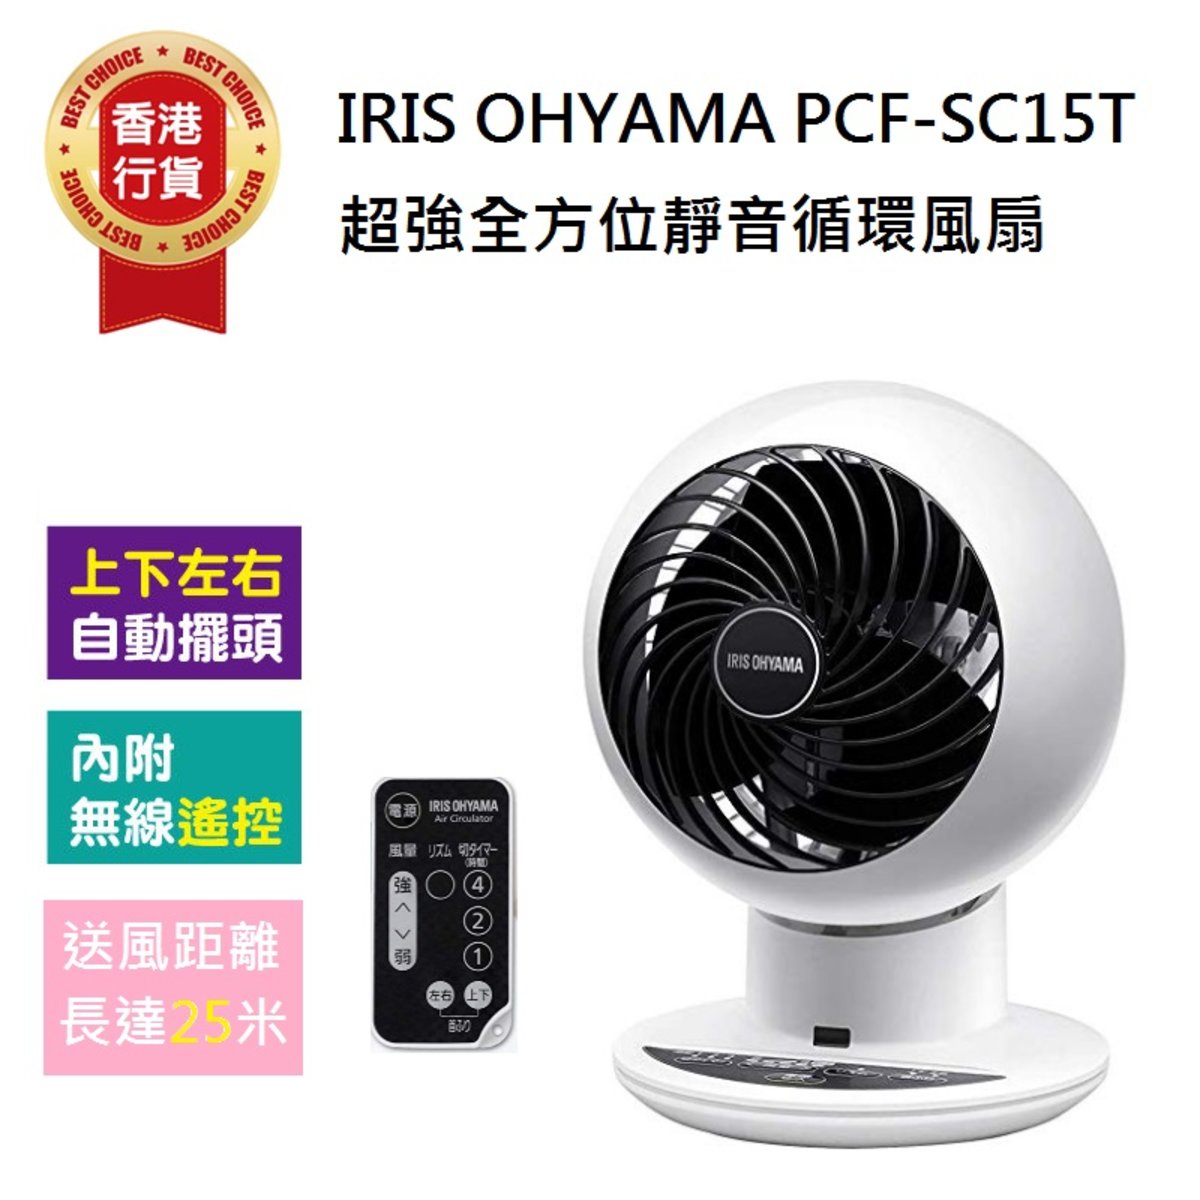 IRIS PCF-SC15T Air Circulation Fan with Remote Control White Black  Color white black HKTVmall The Largest HK Shopping Platform